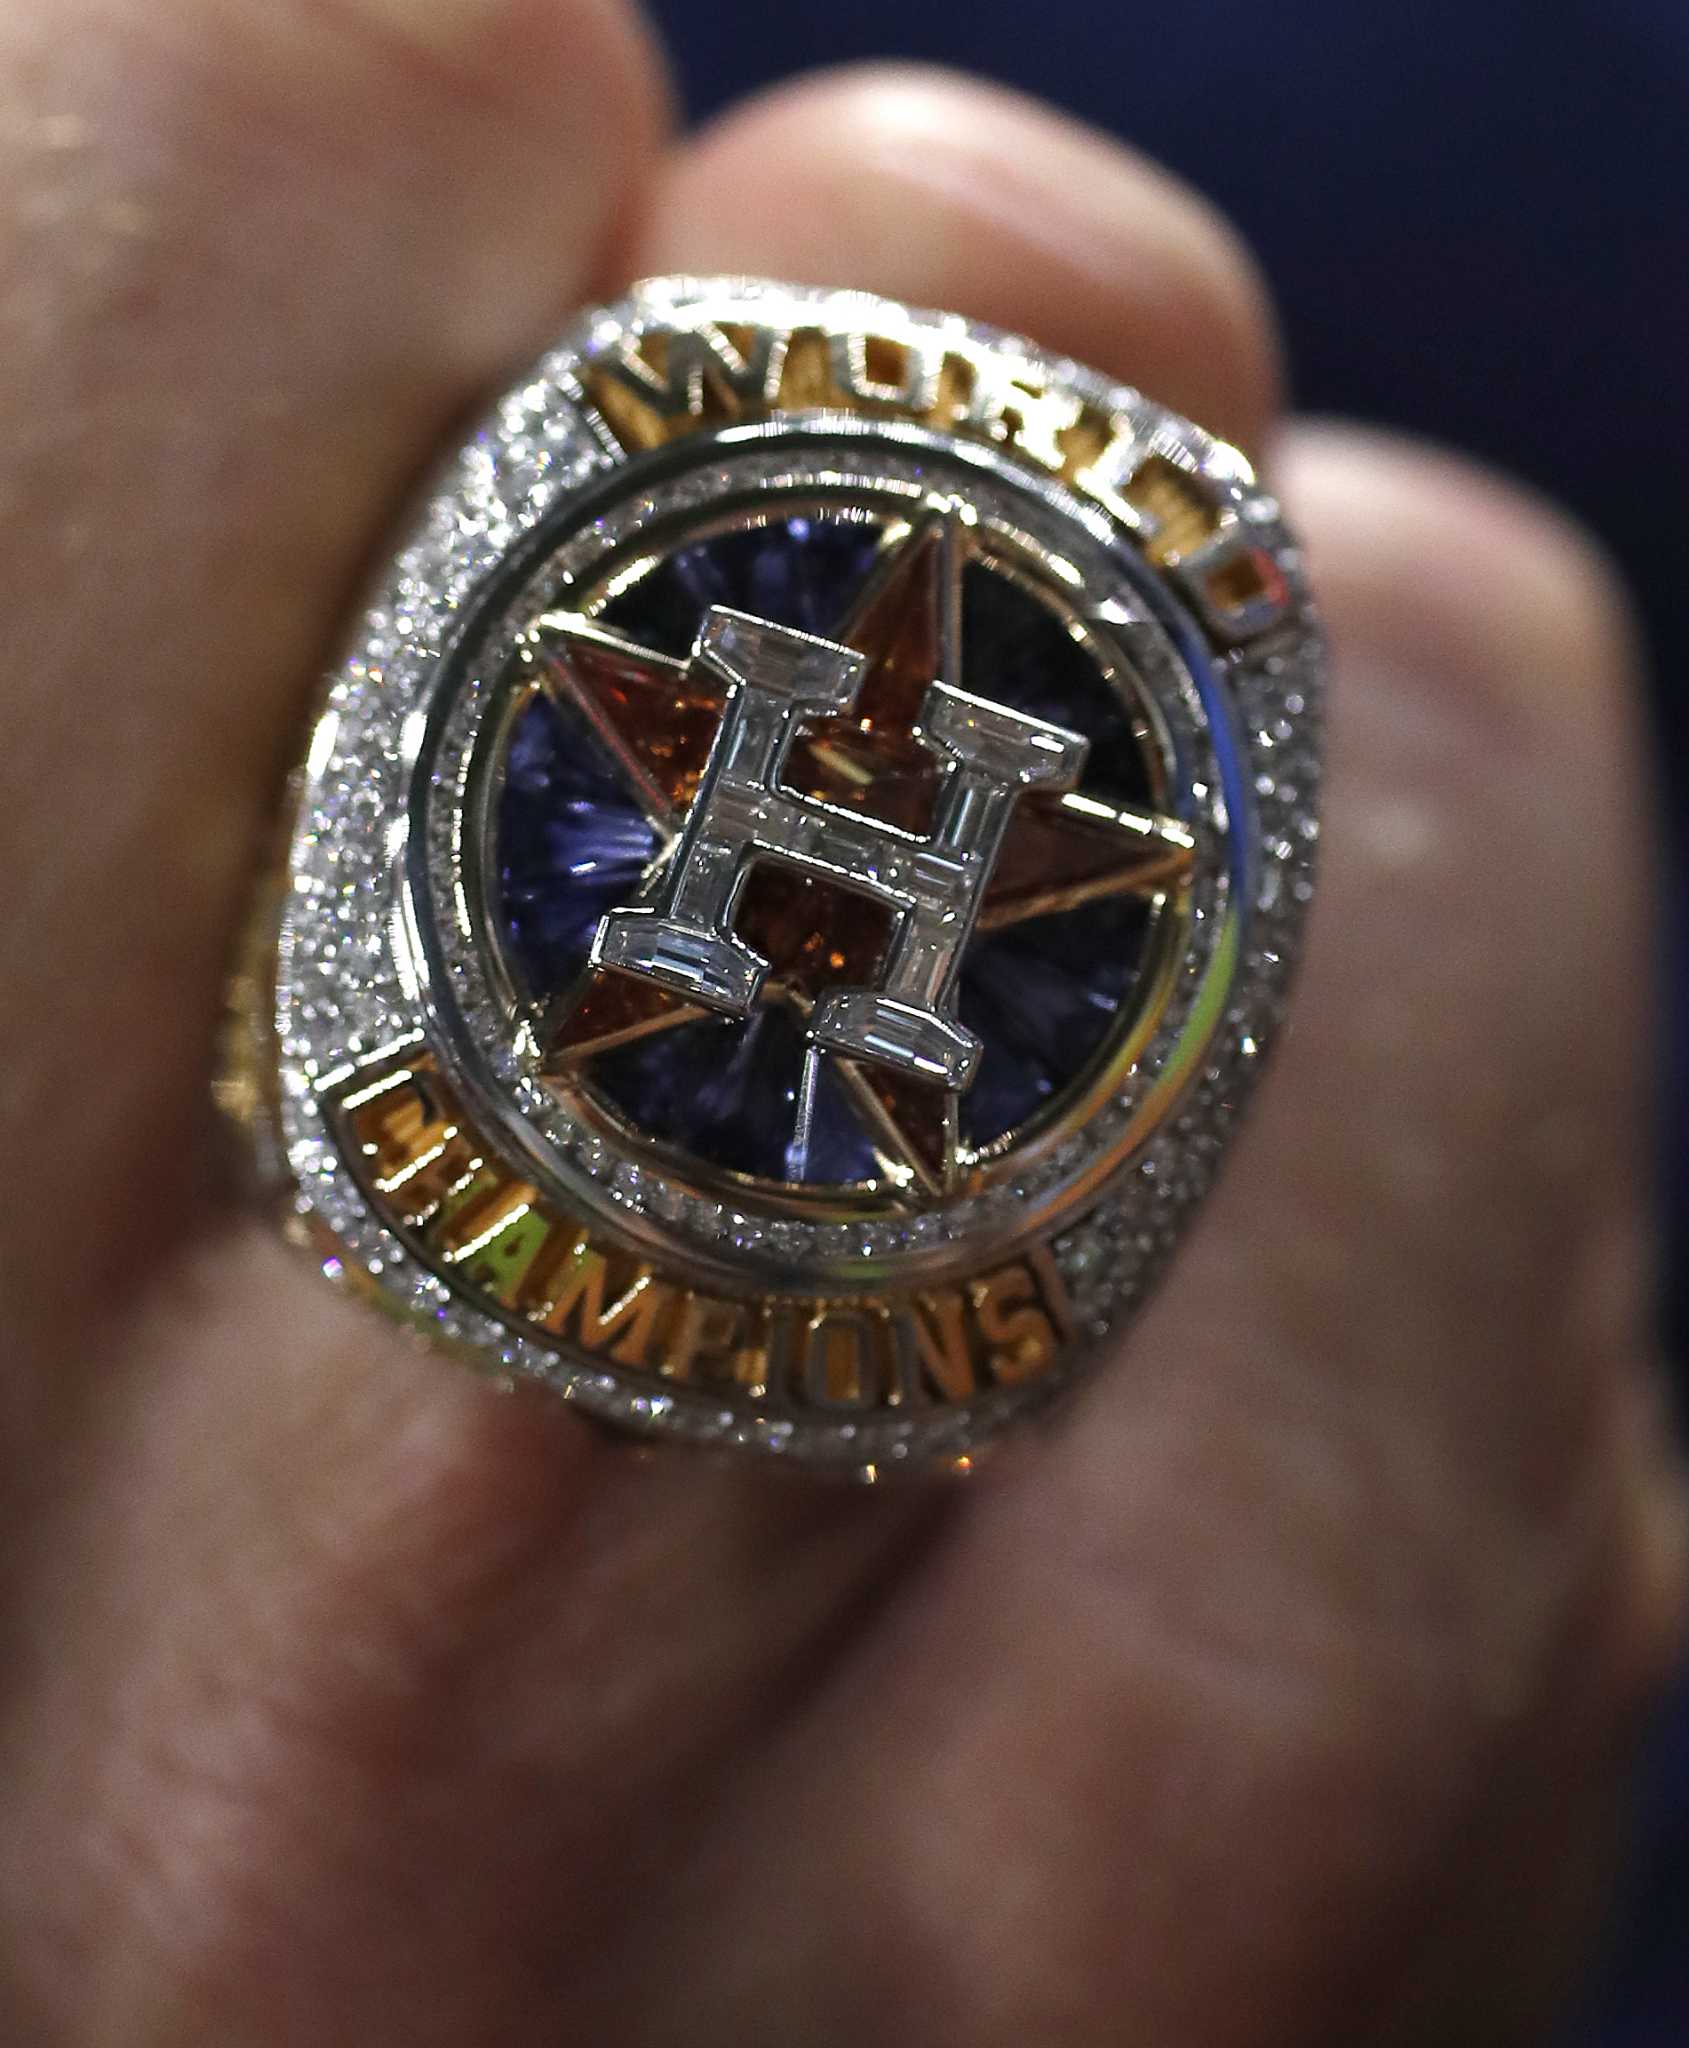 Houston Astros fans can win a personalized World Series championship ring